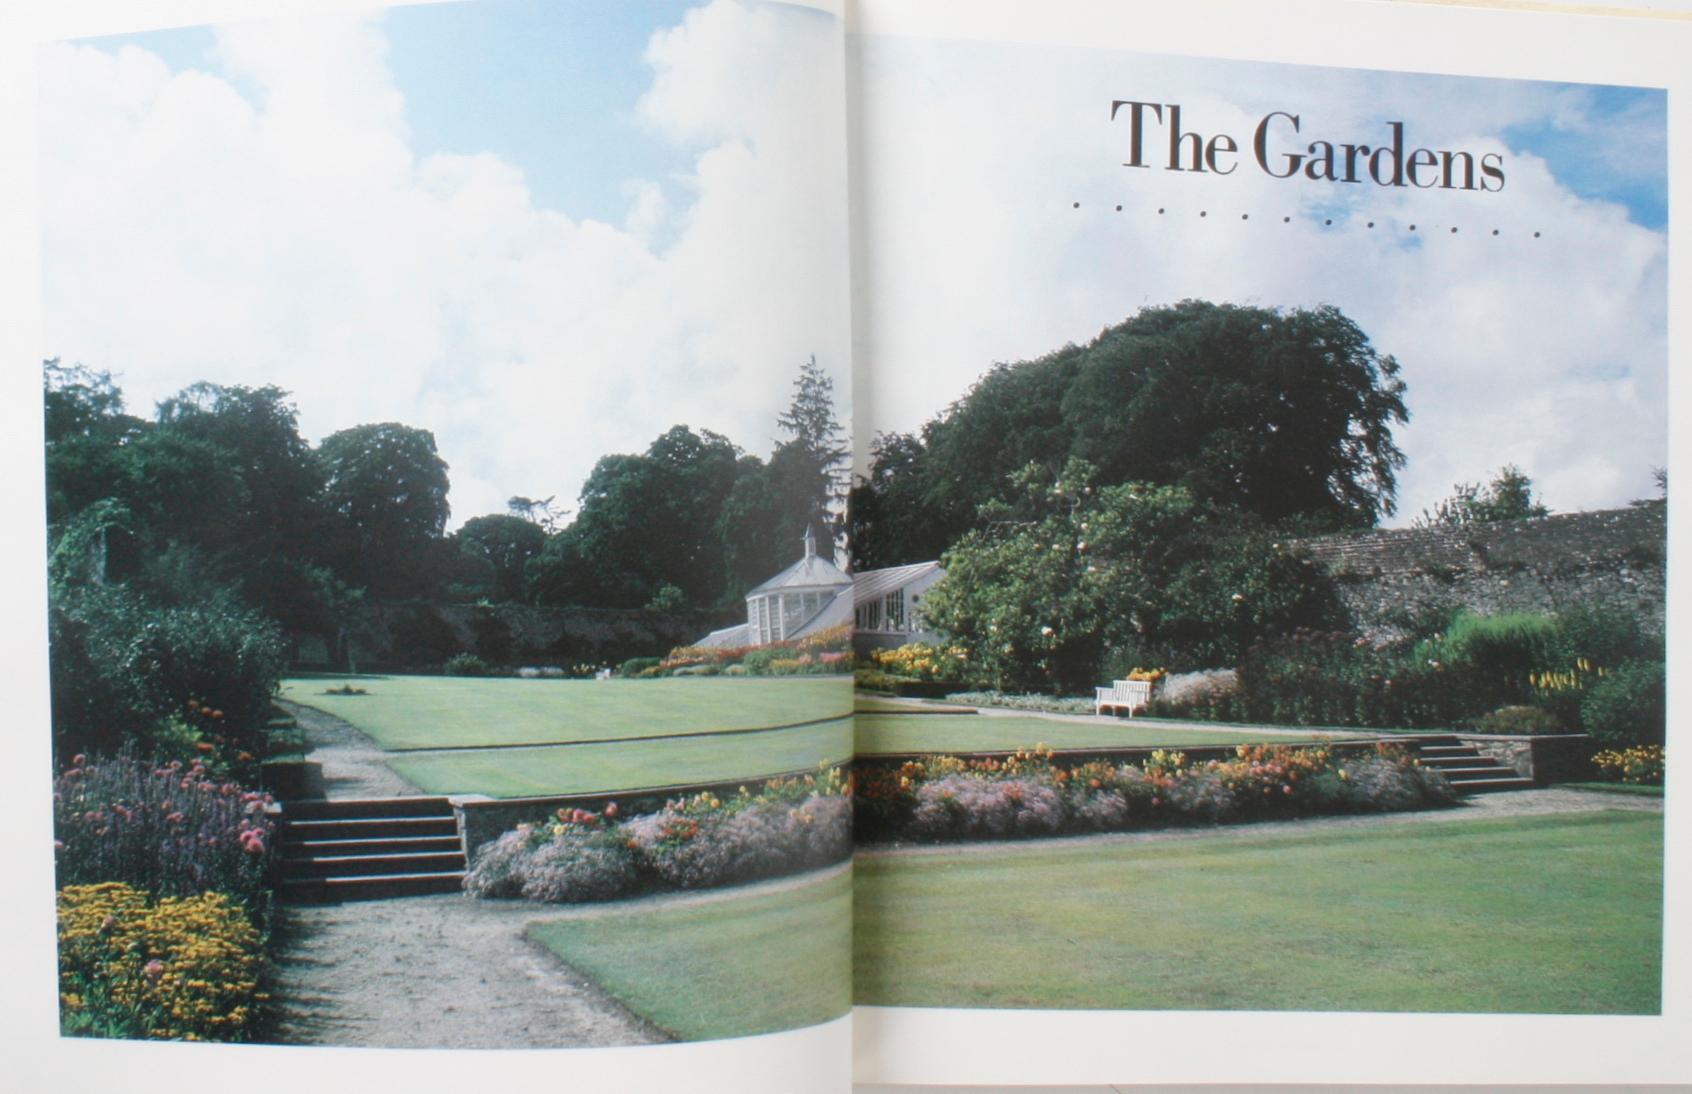 The gardens of Ireland by Michael George and Patrick Bowe. Boston: Little, brown and company, 1986. Stated first edition hardcover with dust jacket. Introduction to the beautiful gardens of Ireland including their history, climate, geology,